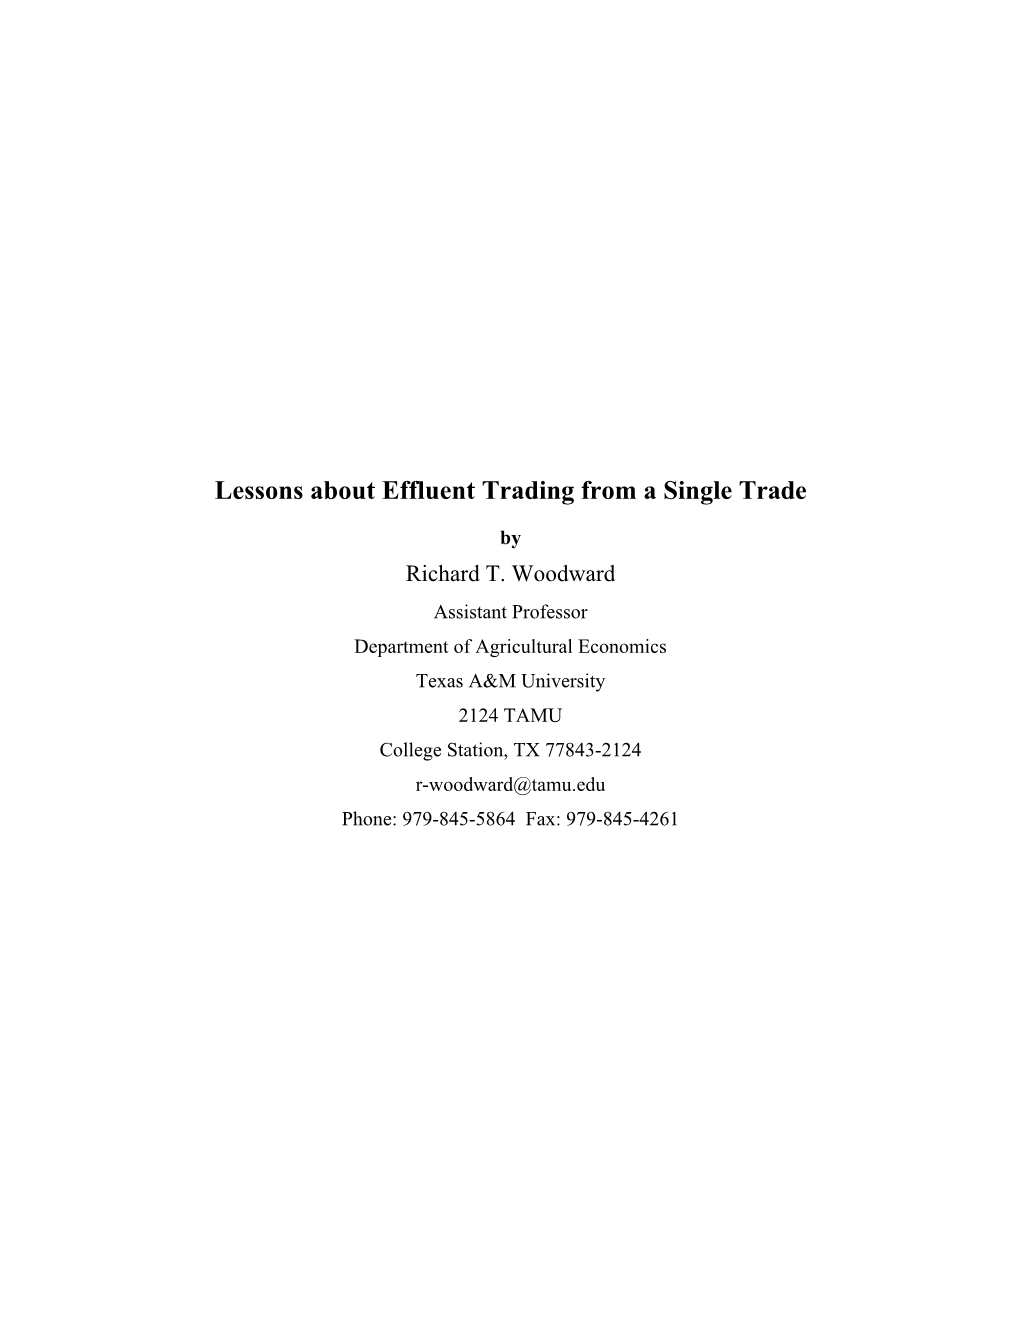 Lessons About Effluent Trading from a Single Trade